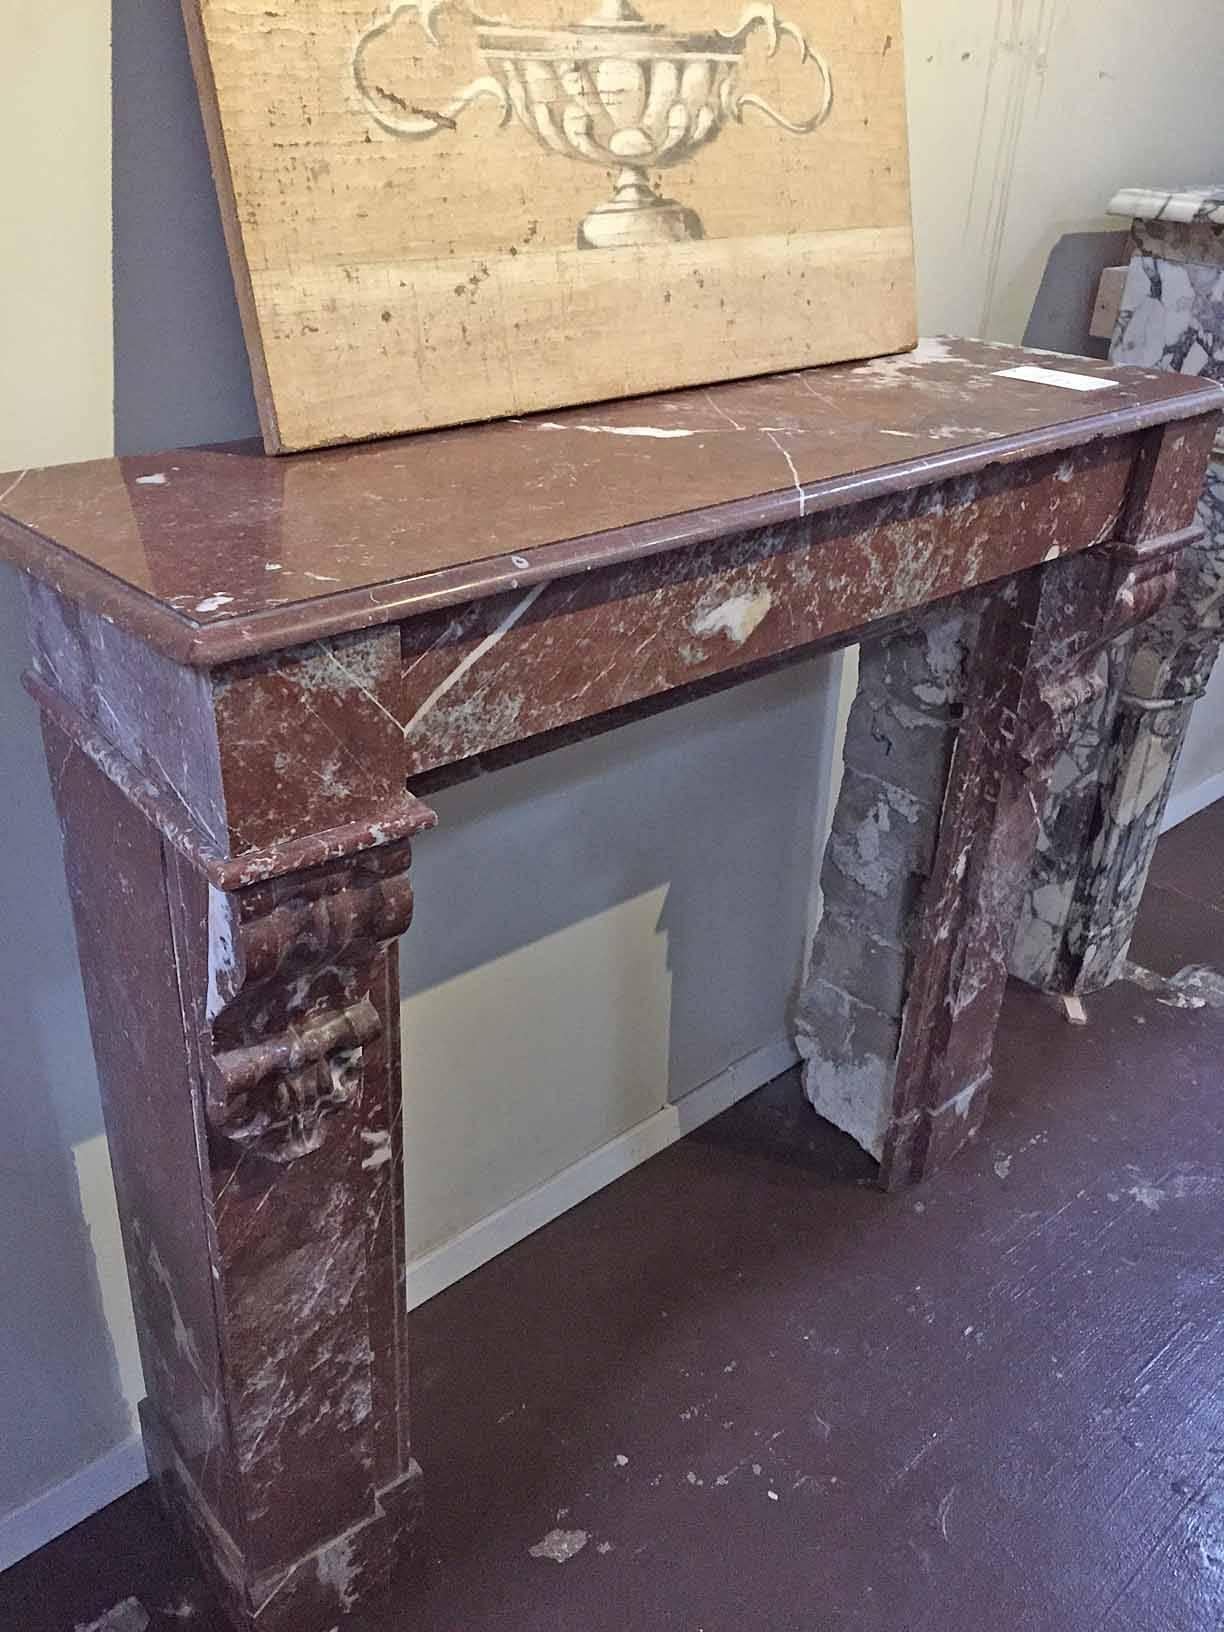 With a straight simple lintel, this antique marble mantel as scroll-like designs on the top of each leg.

Origin: France. 

circa 1880. 

Measurements: 47